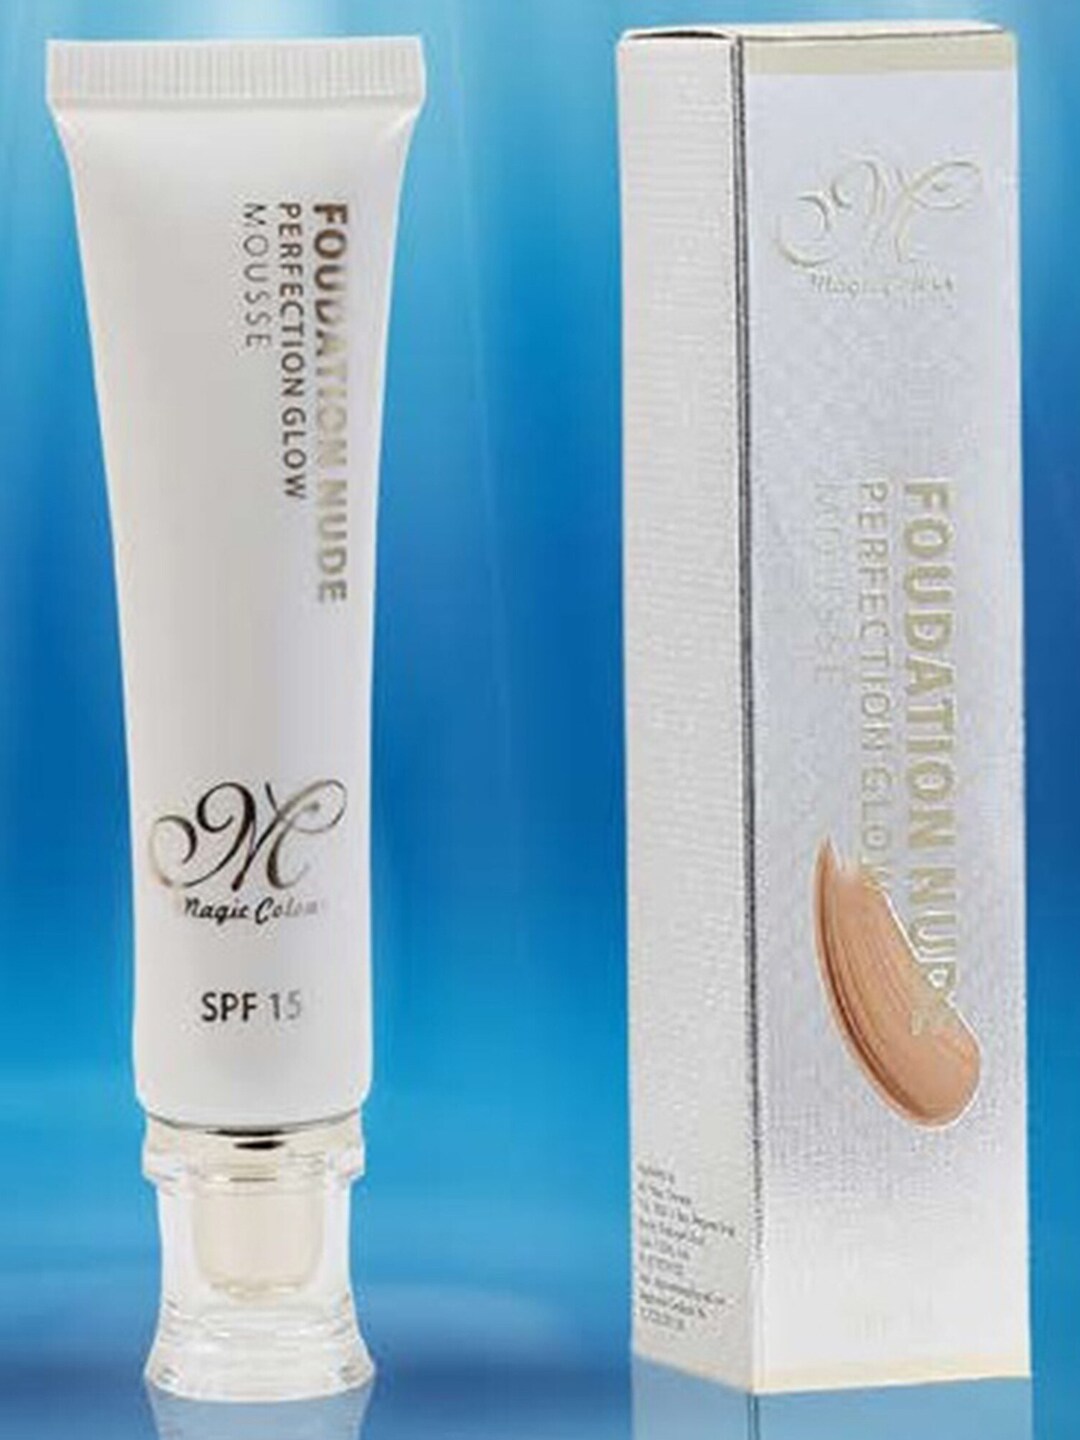 Magic Colour SPF 15 Perfection Glow Mousse Foundation 30 g - Natural 2 Price in India